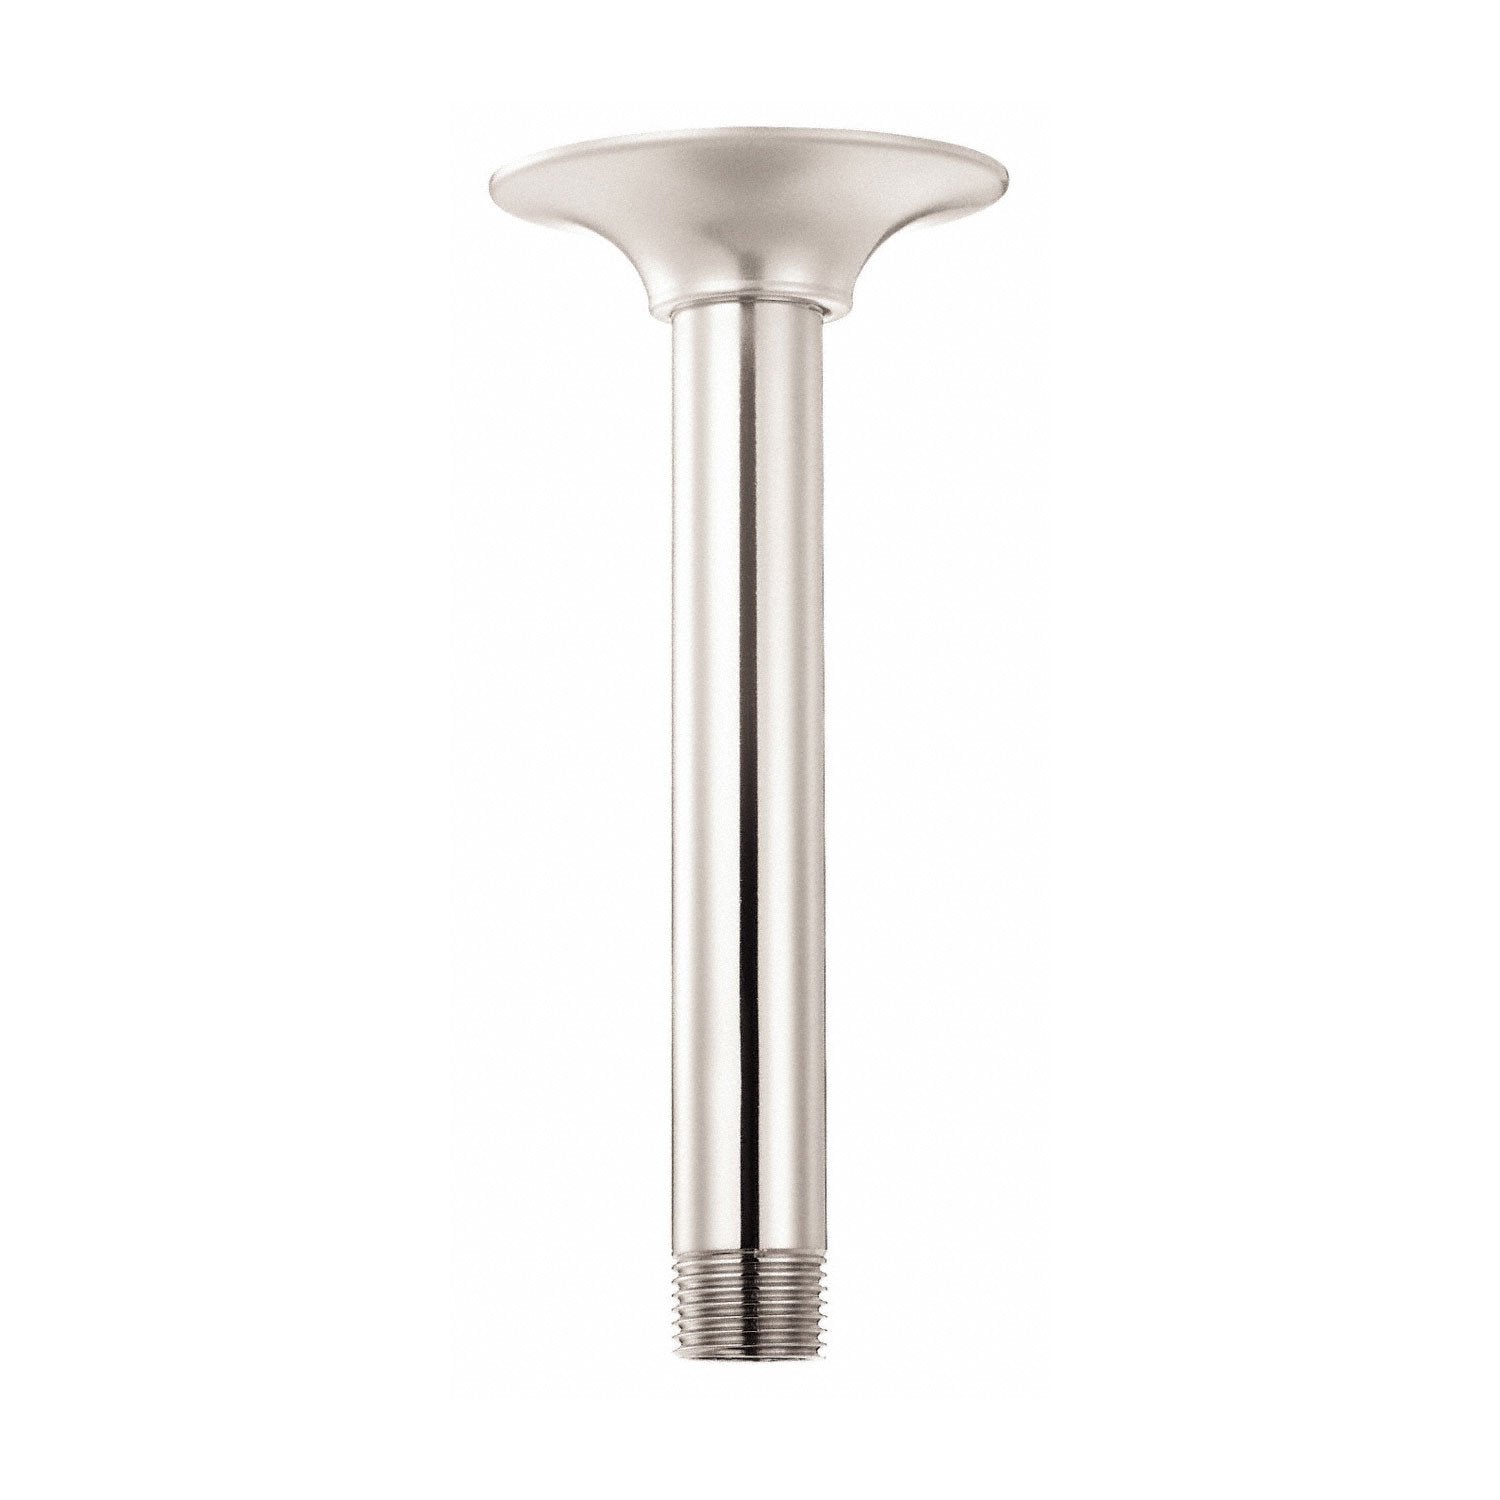 Danze 6" Polished Nickel Ceiling Mount Shower Arm with Flange